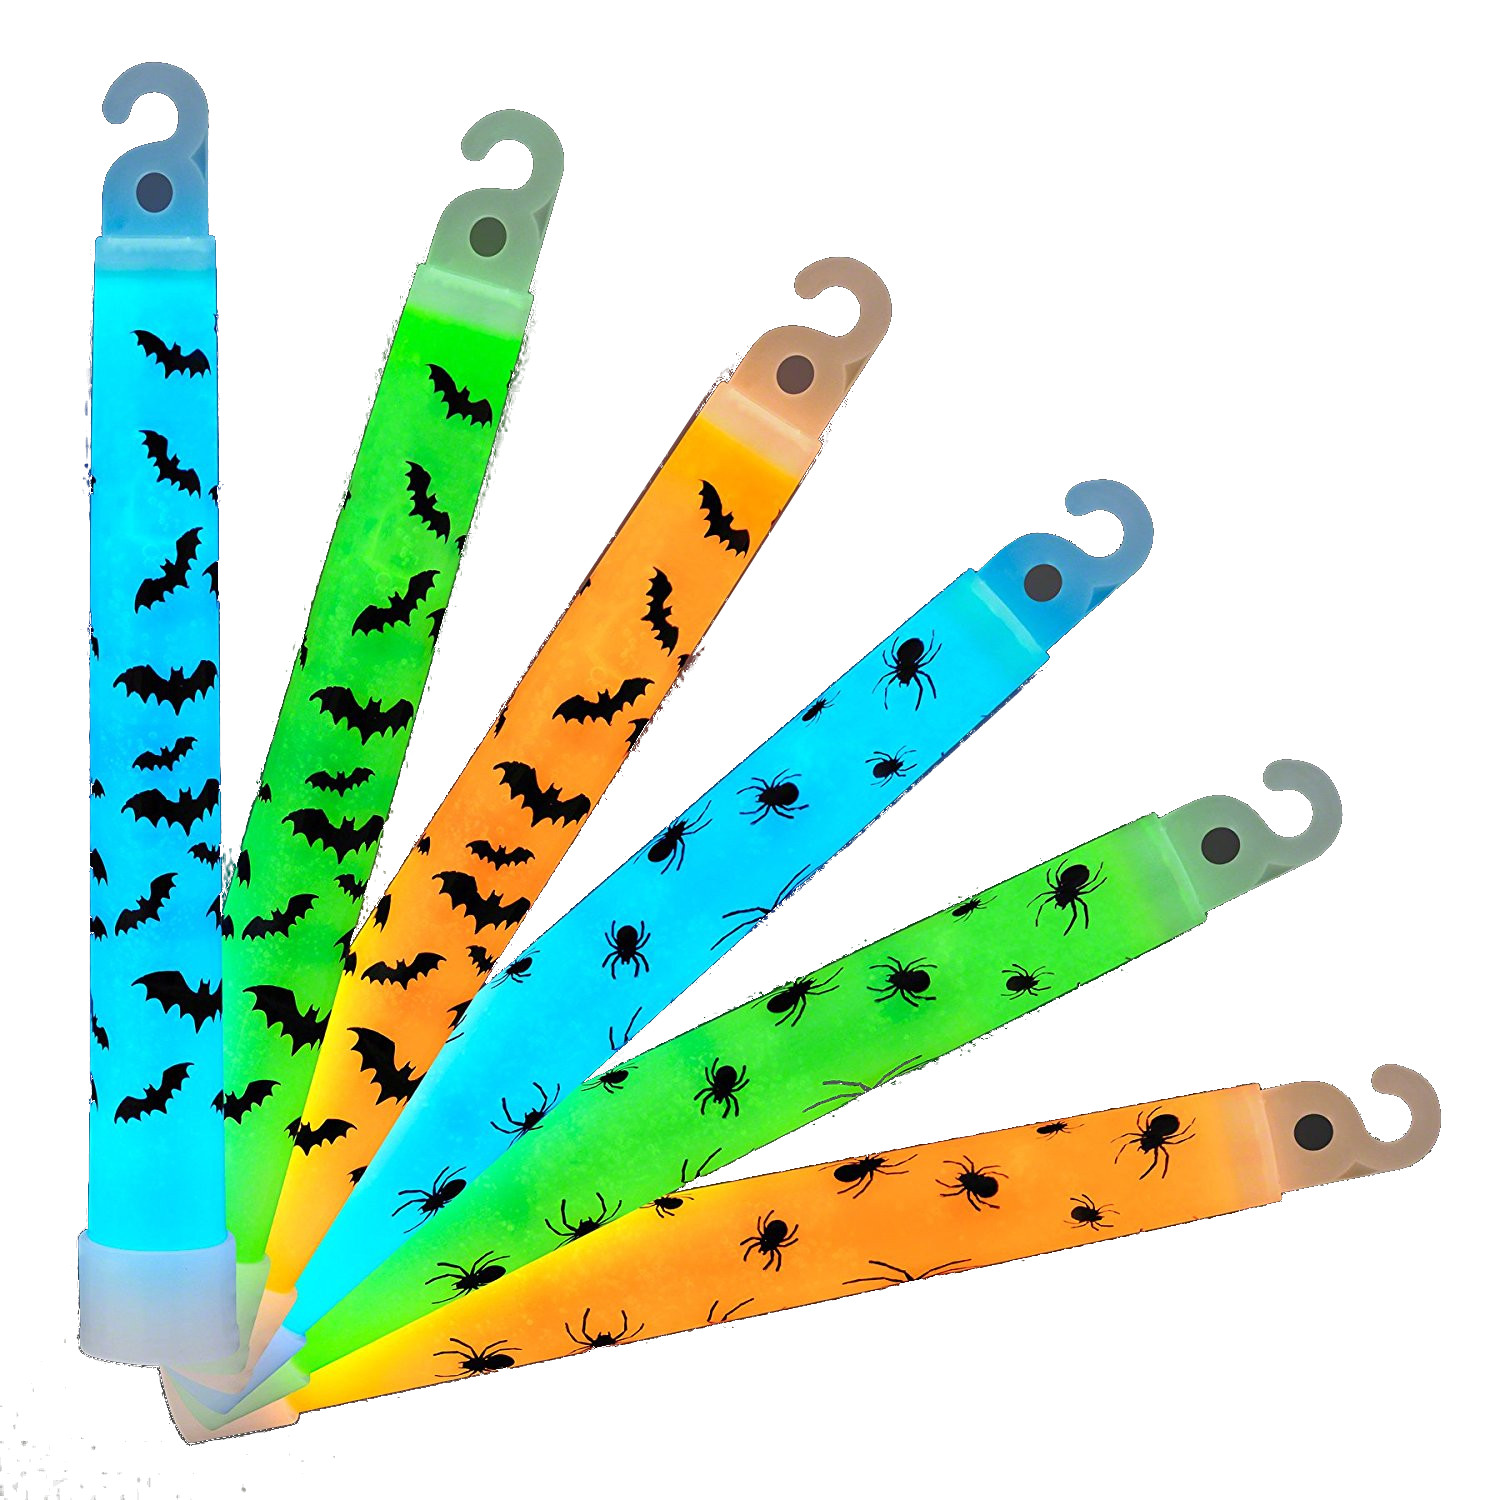 Halloween Spiders and Bats 6 Inch GLOW STICKs Pack of 25